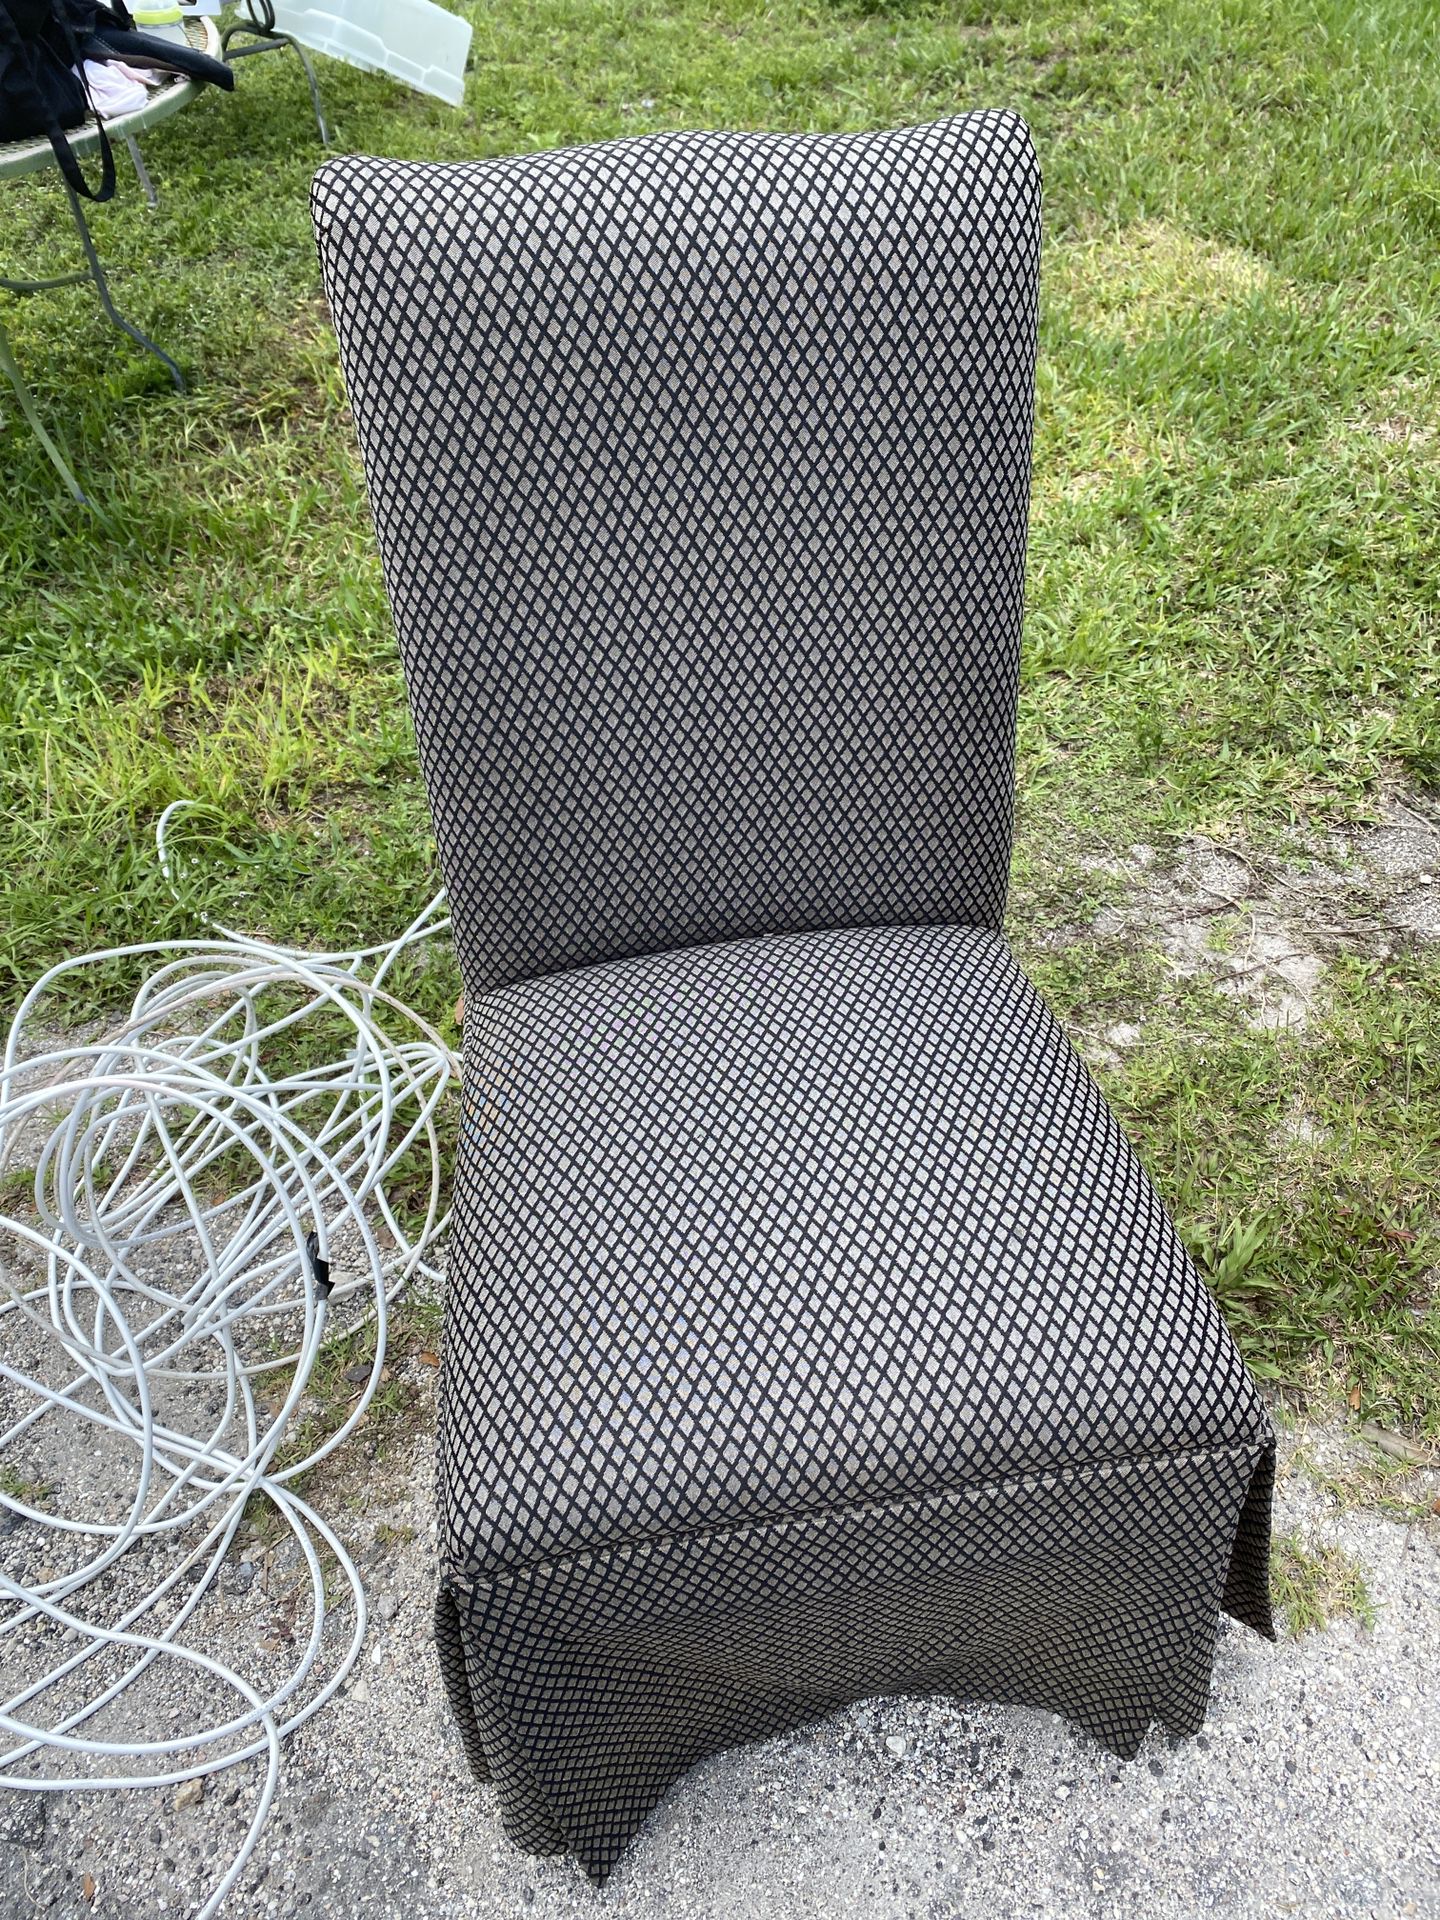 Free Chair And Other Stuff 